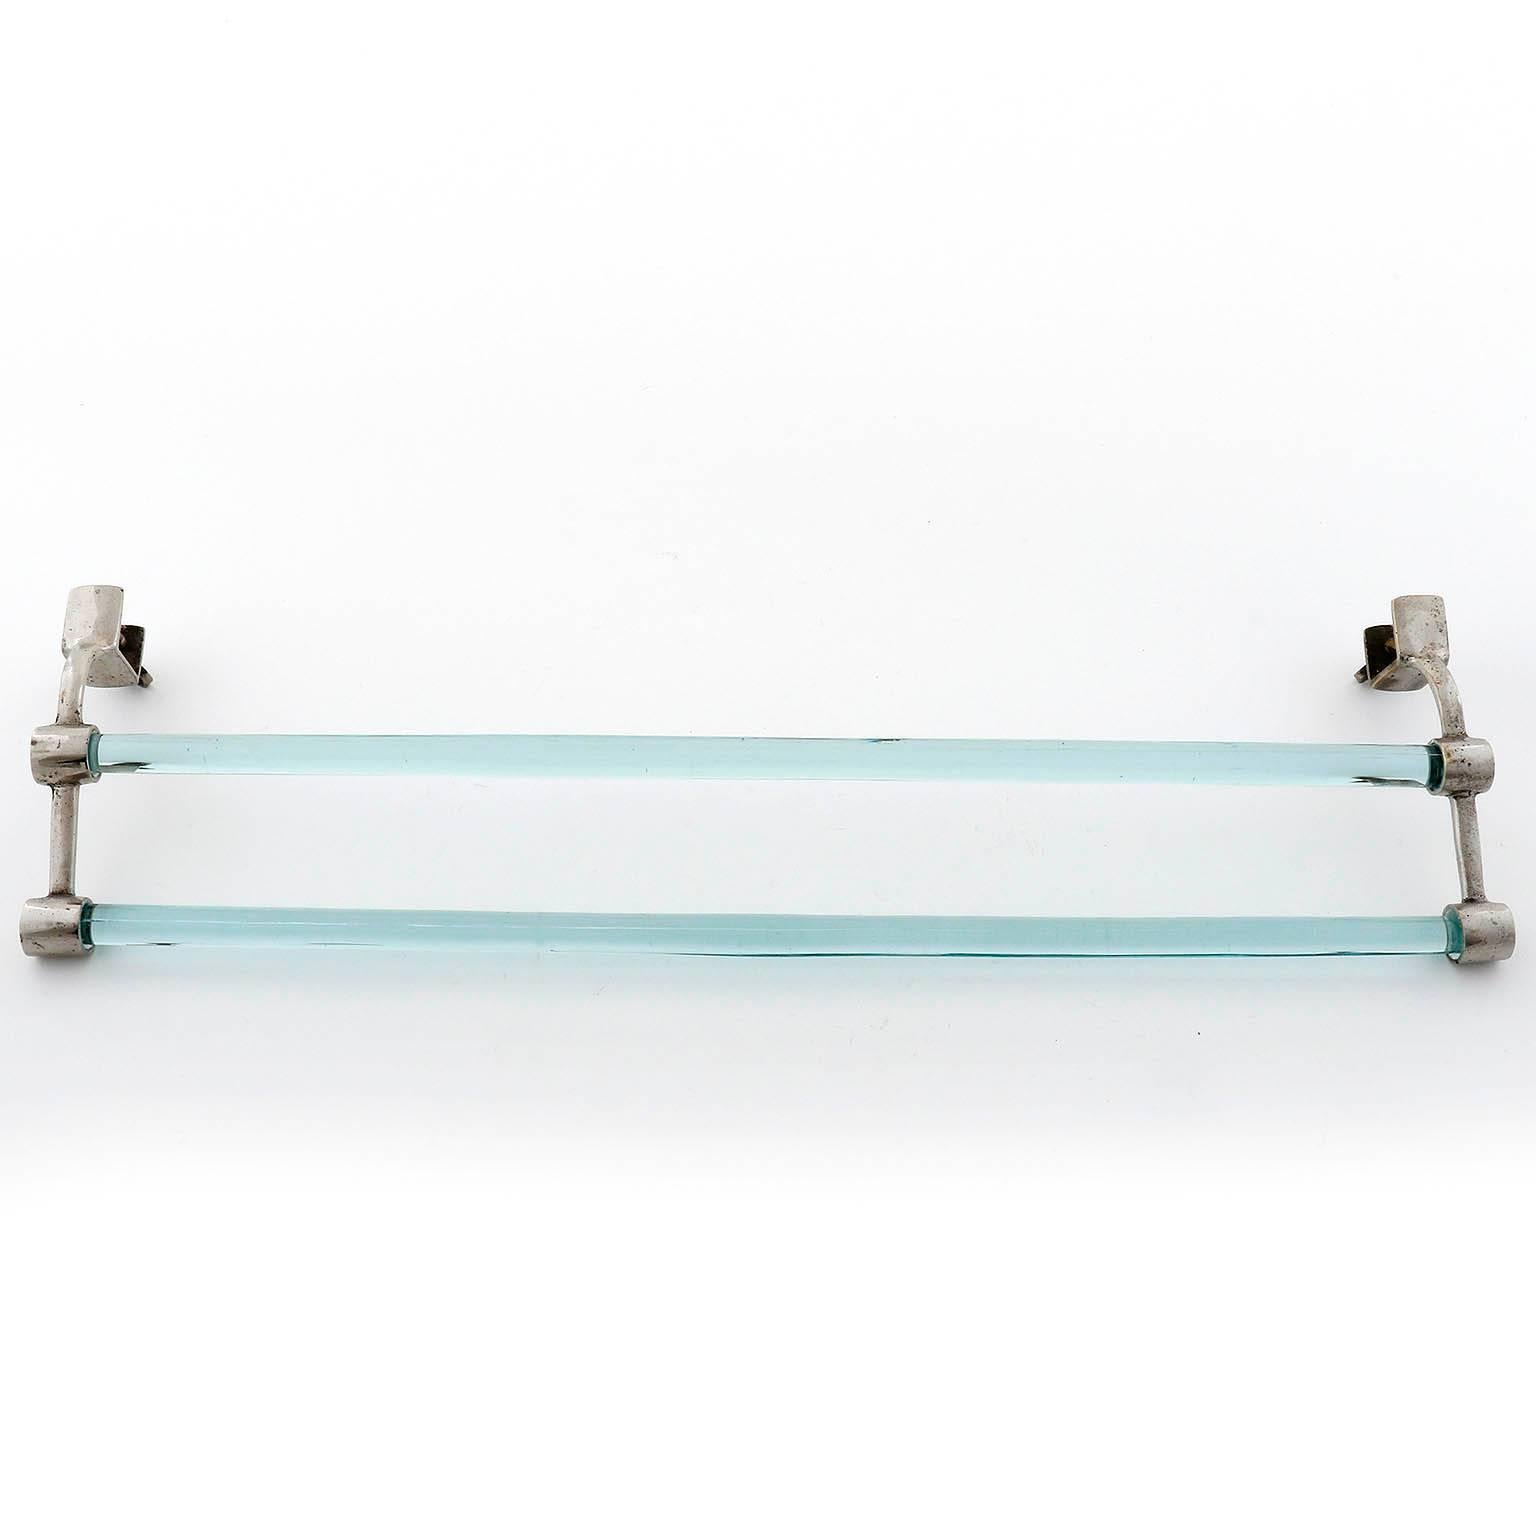 An Art Deco towel holder with two bars made of nickel plated brass and glass rods, manufactured, circa 1930.
There are two screws to mount the item on a board or table. Nice patina on nickel.